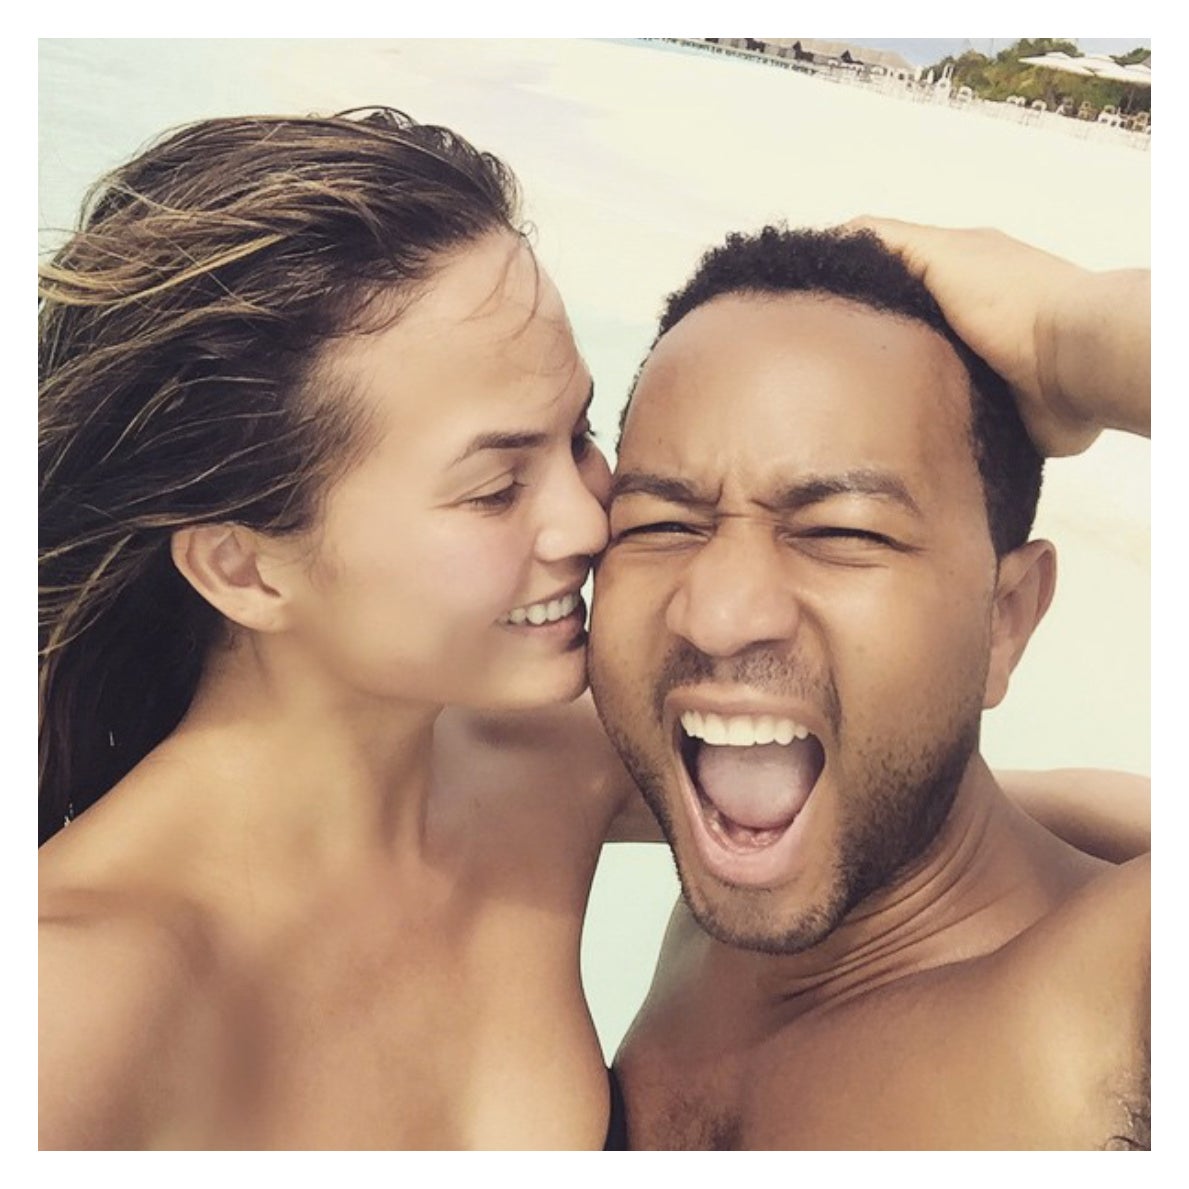 John Legend and Chrissy Teigen Bring Baby Daughter Luna to the Spot Where They Married
